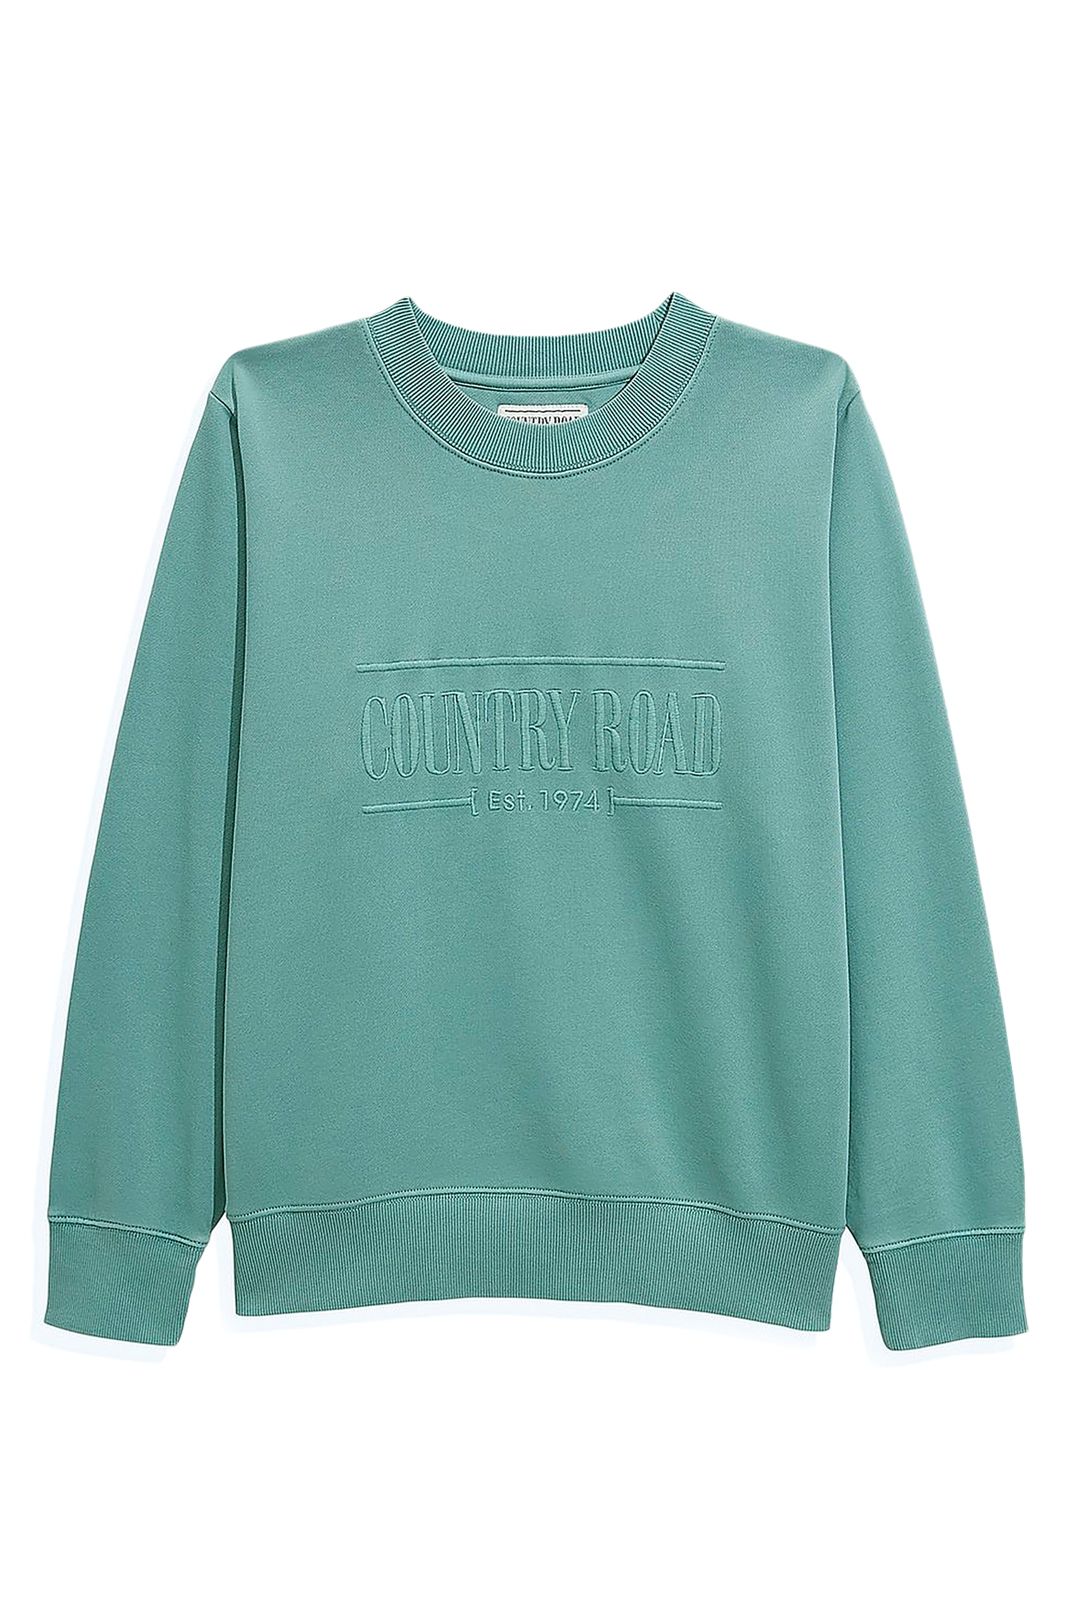 Country Road Heritage Sweat Petrol